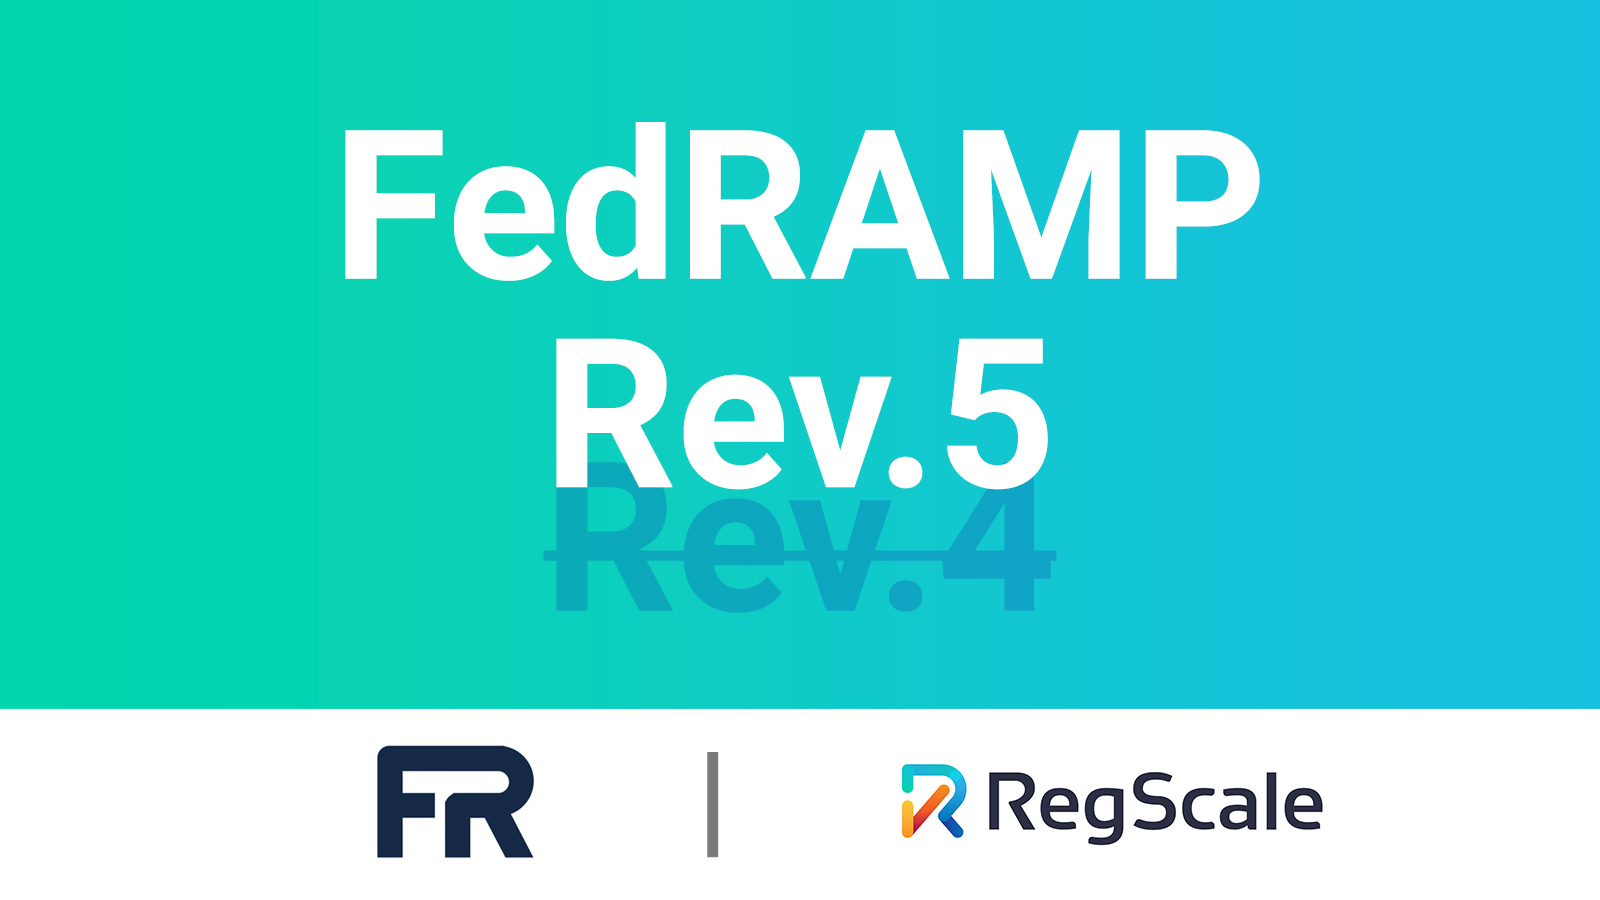 FedRAMP Rev. 5 Baselines are Here, Now What?